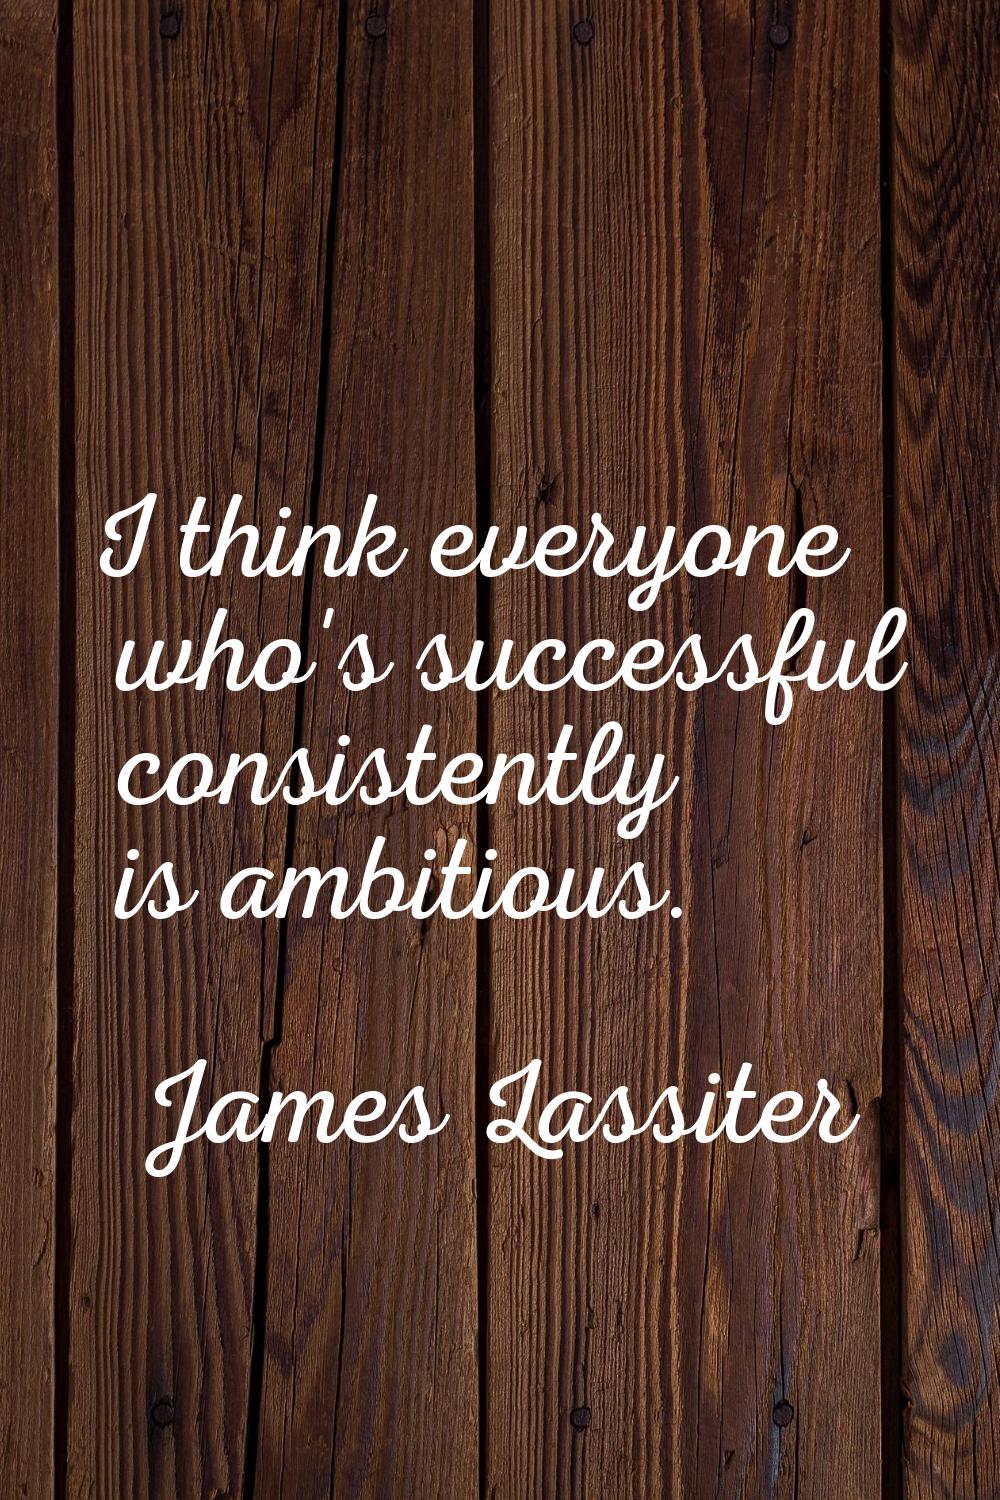 I think everyone who's successful consistently is ambitious.